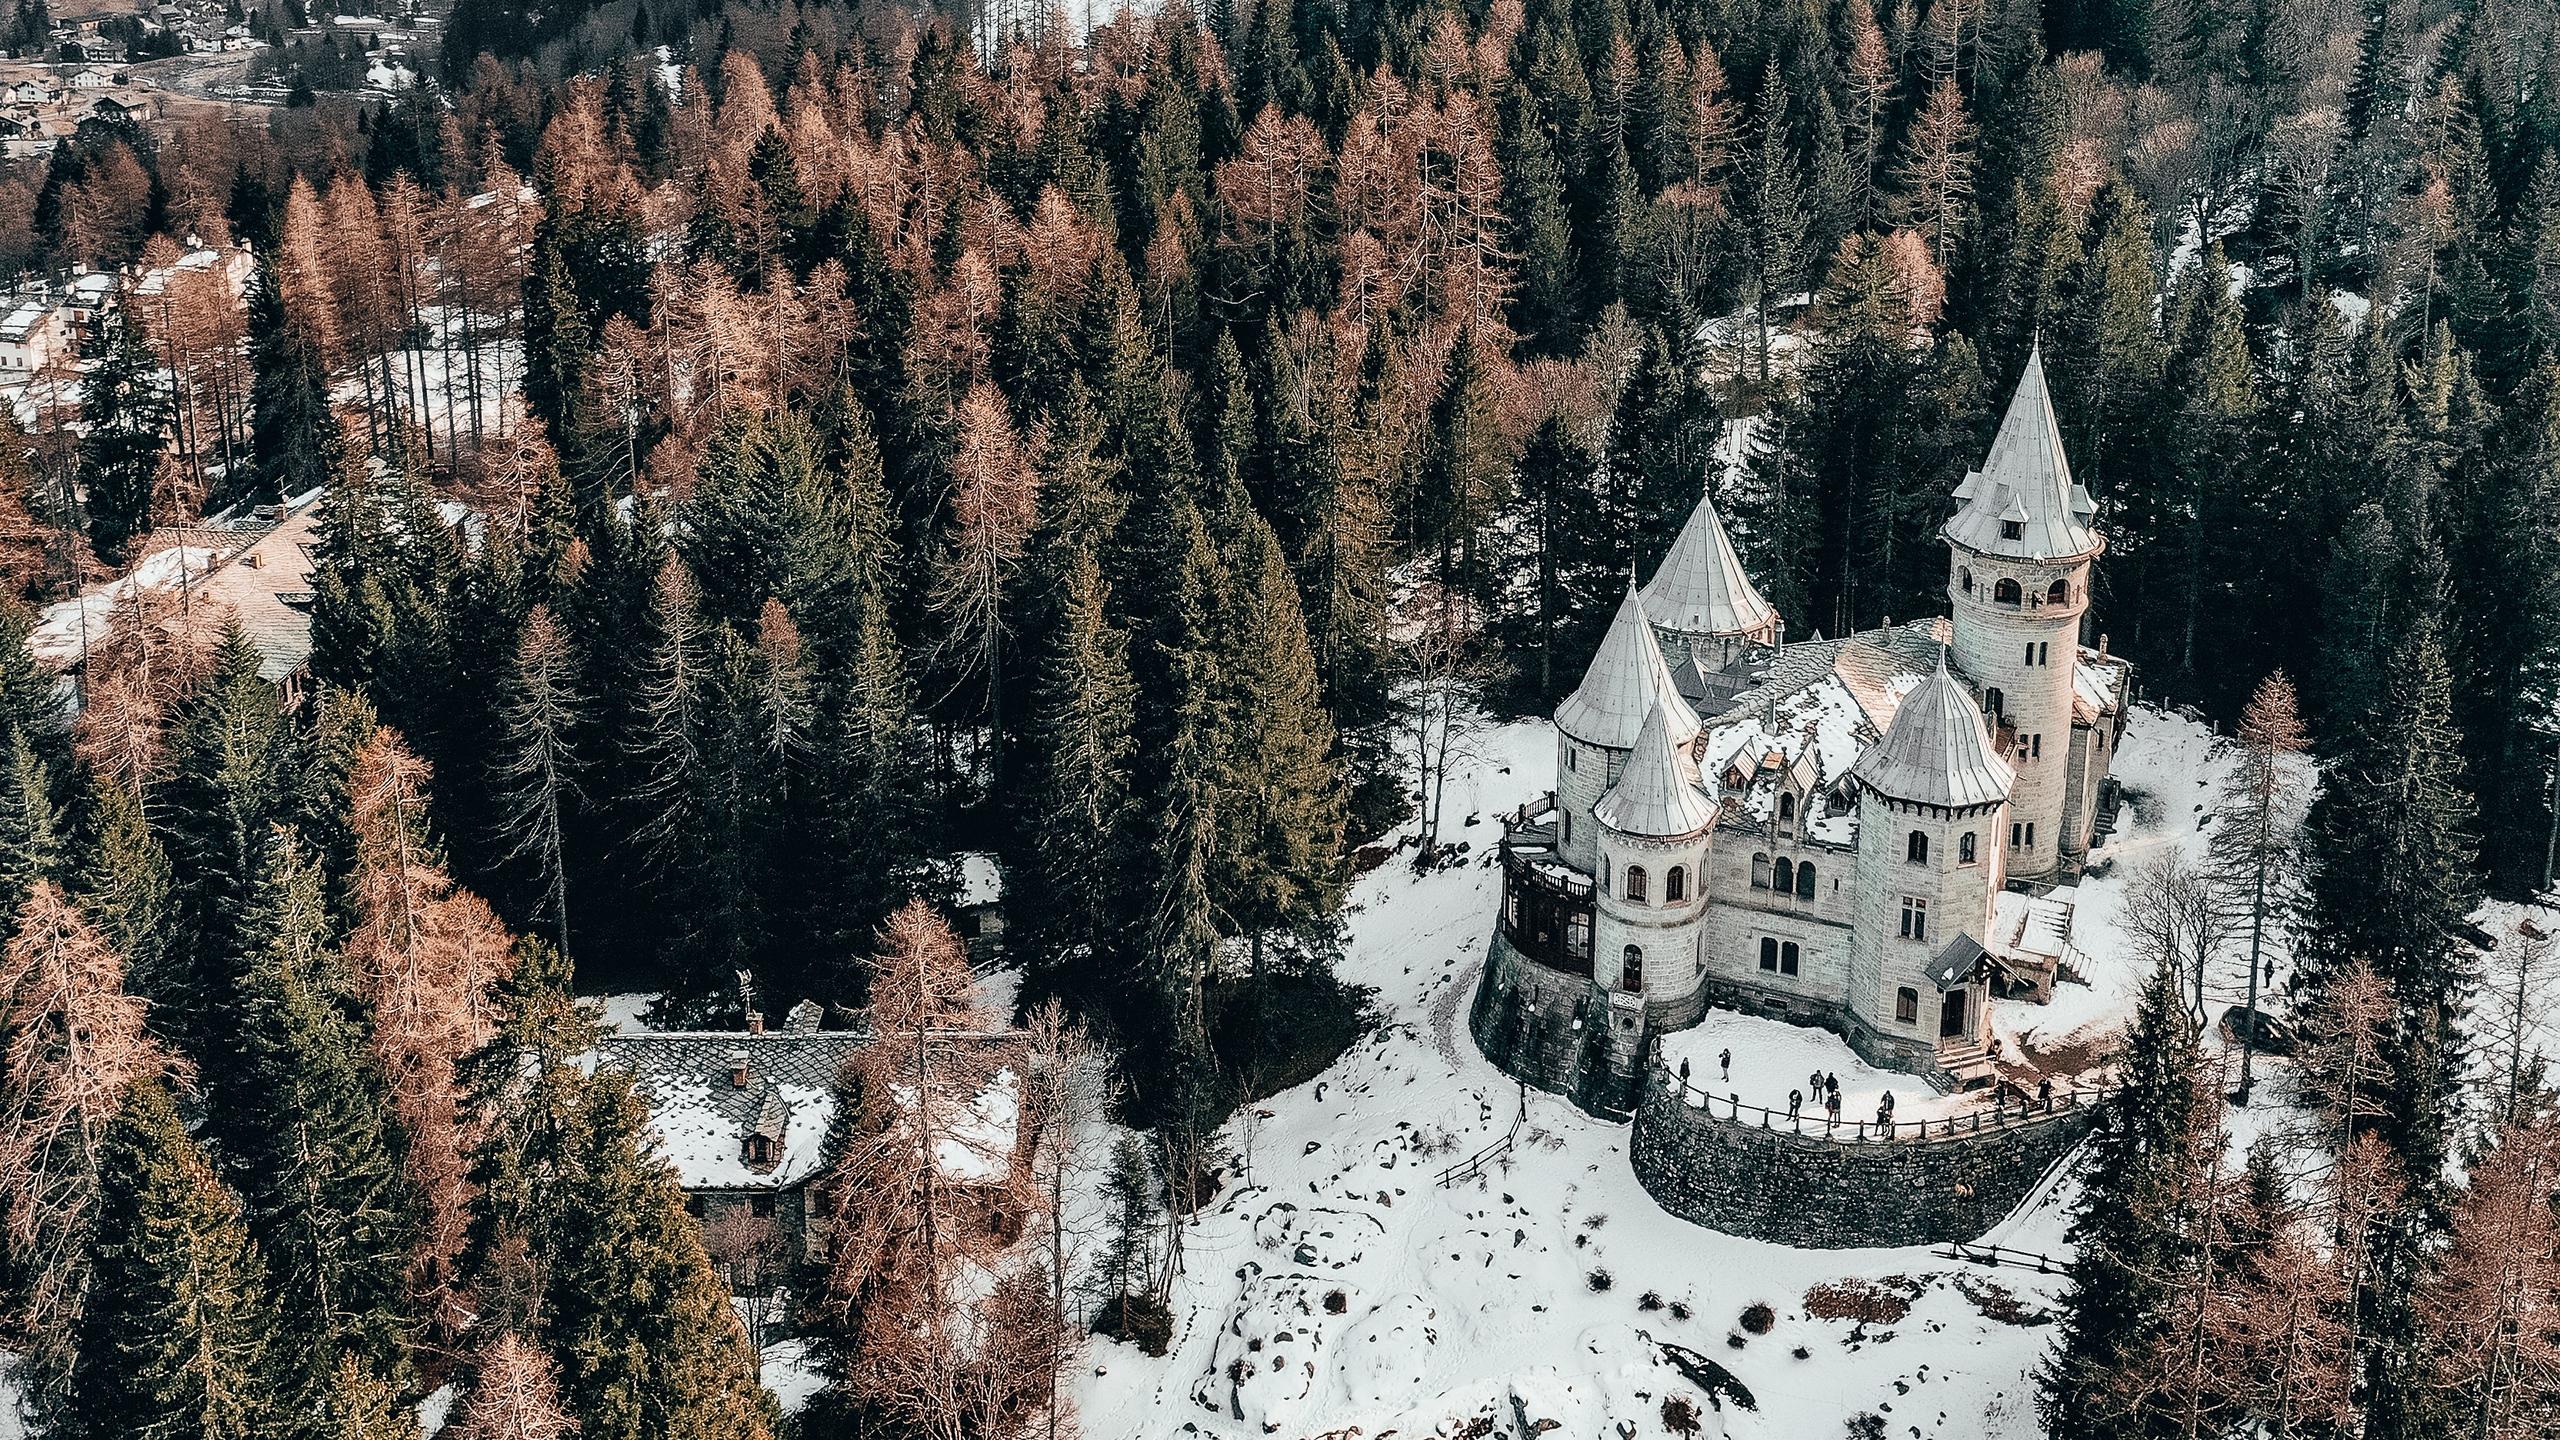 Download wallpaper 2560x1440 castle, aerial view, winter, snow